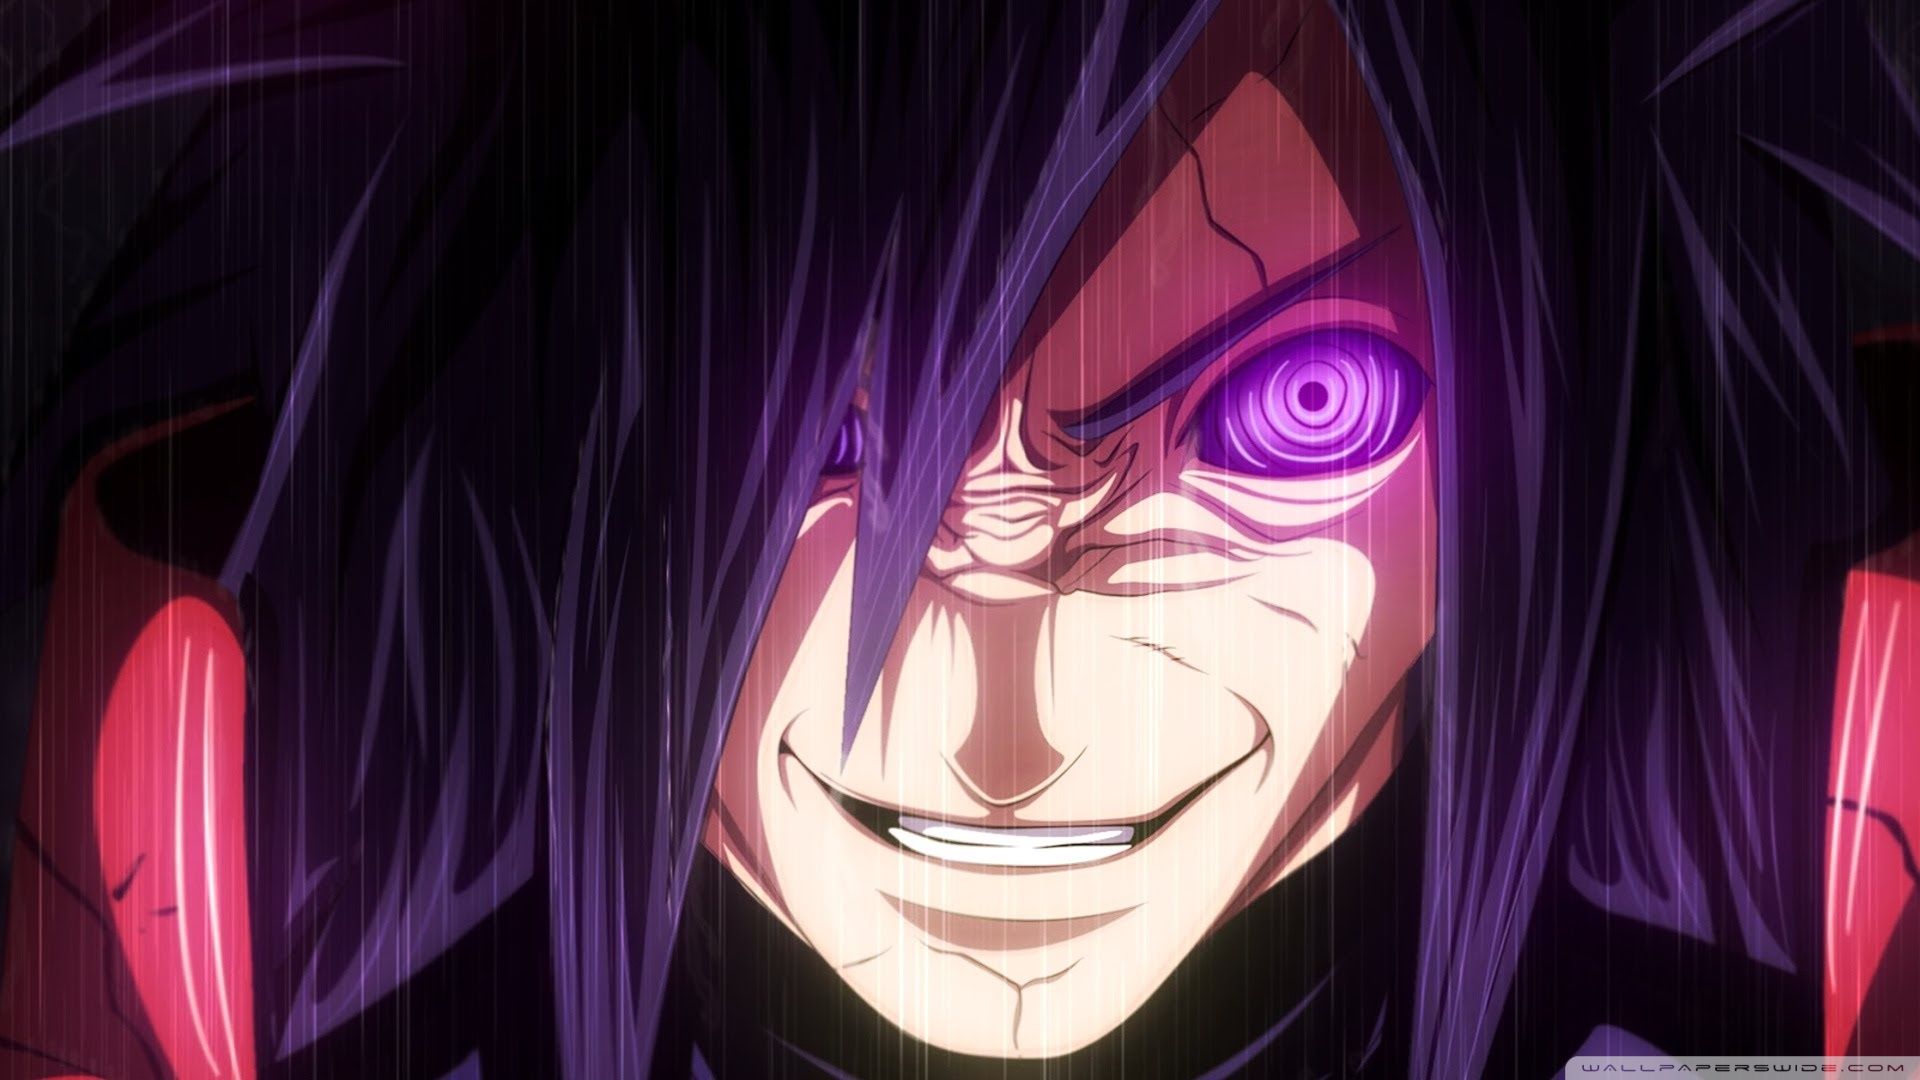 Madara Uchiha, a complex villain in Naruto. His relentless quest for power and enigmatic dual identity as 